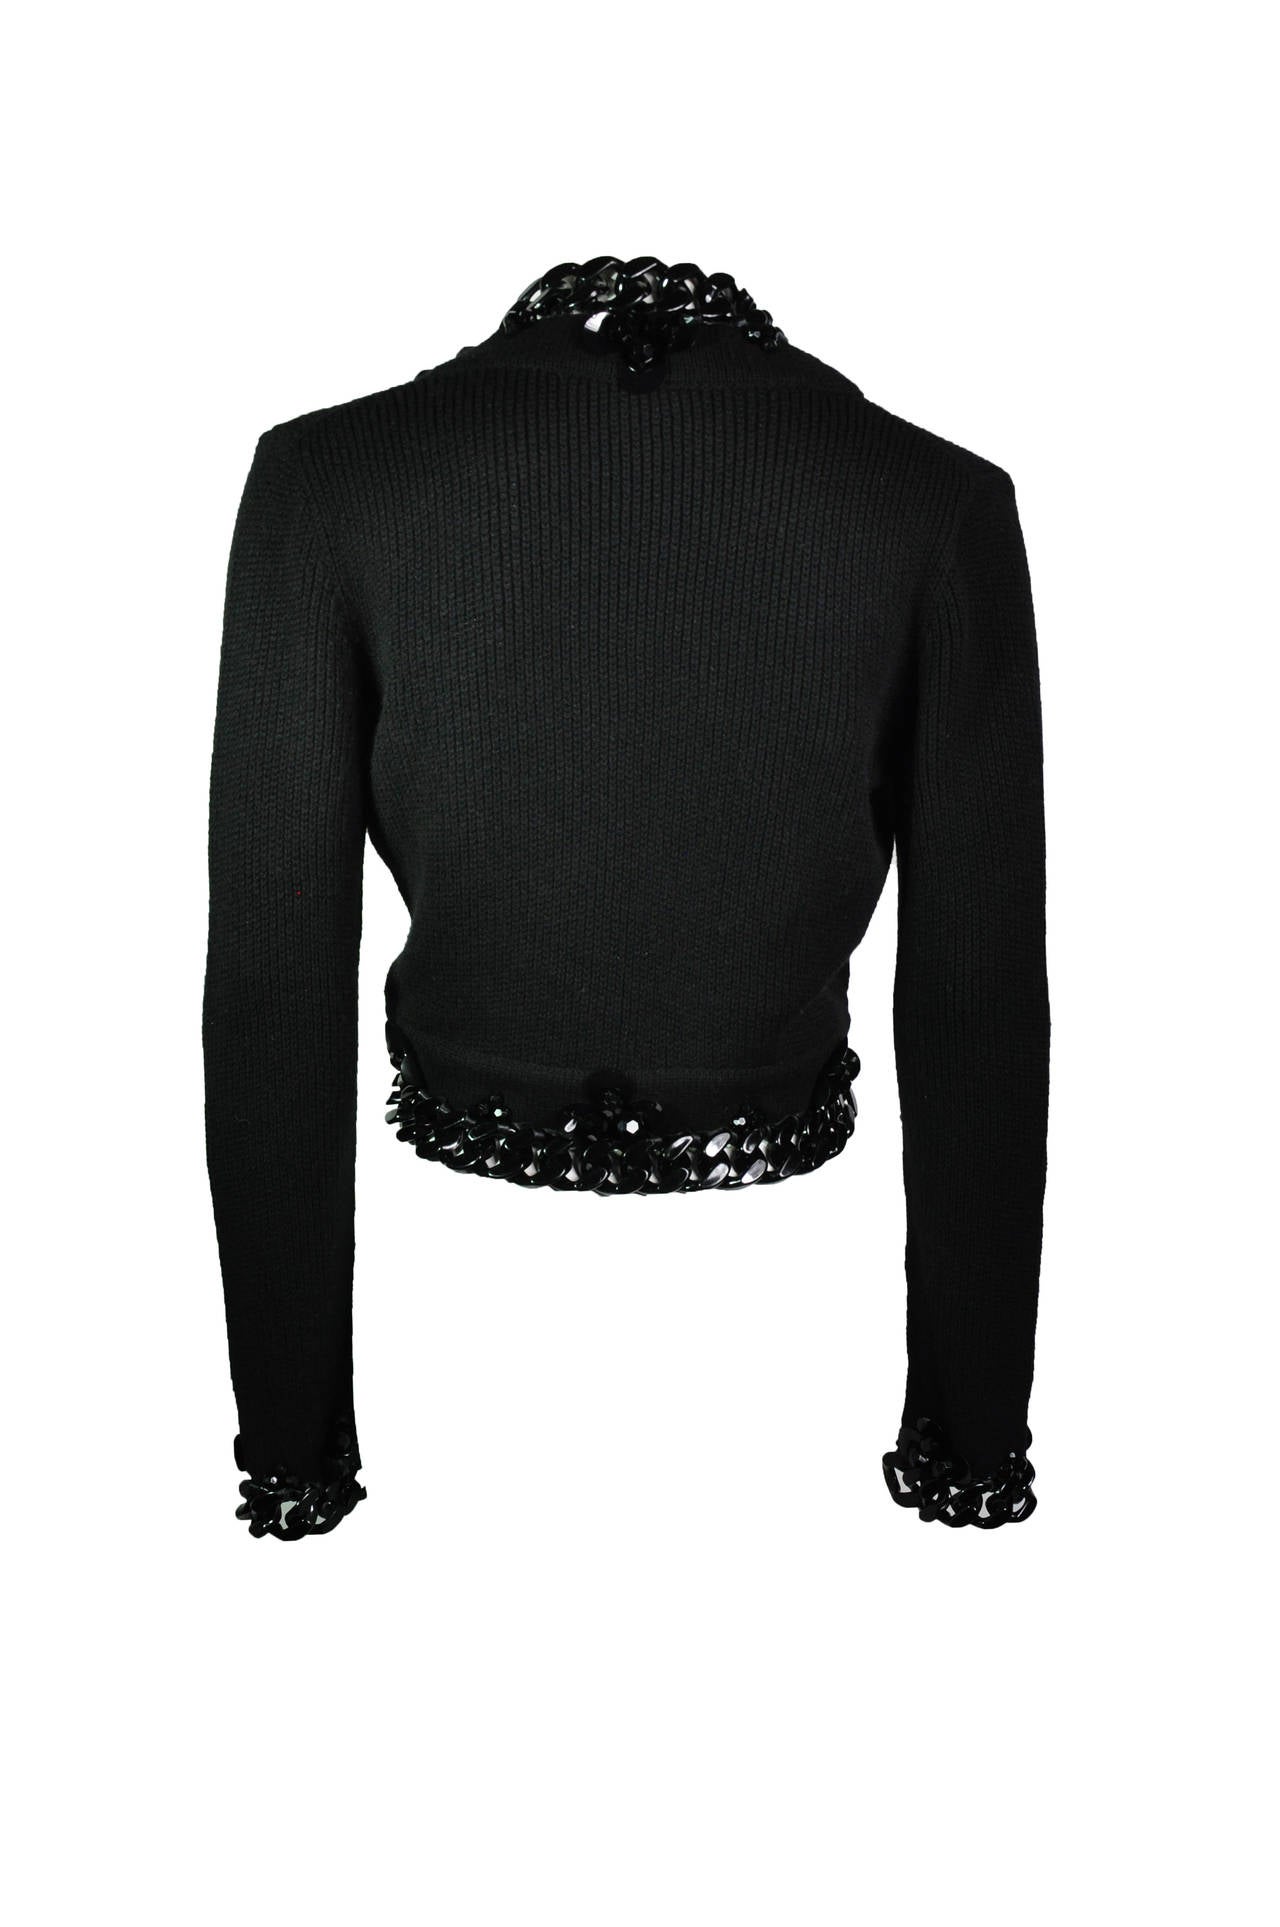 Oscar de la Renta Black Lucite Chain Around Cashmere Cardigan In Excellent Condition For Sale In Hong Kong, Hong Kong